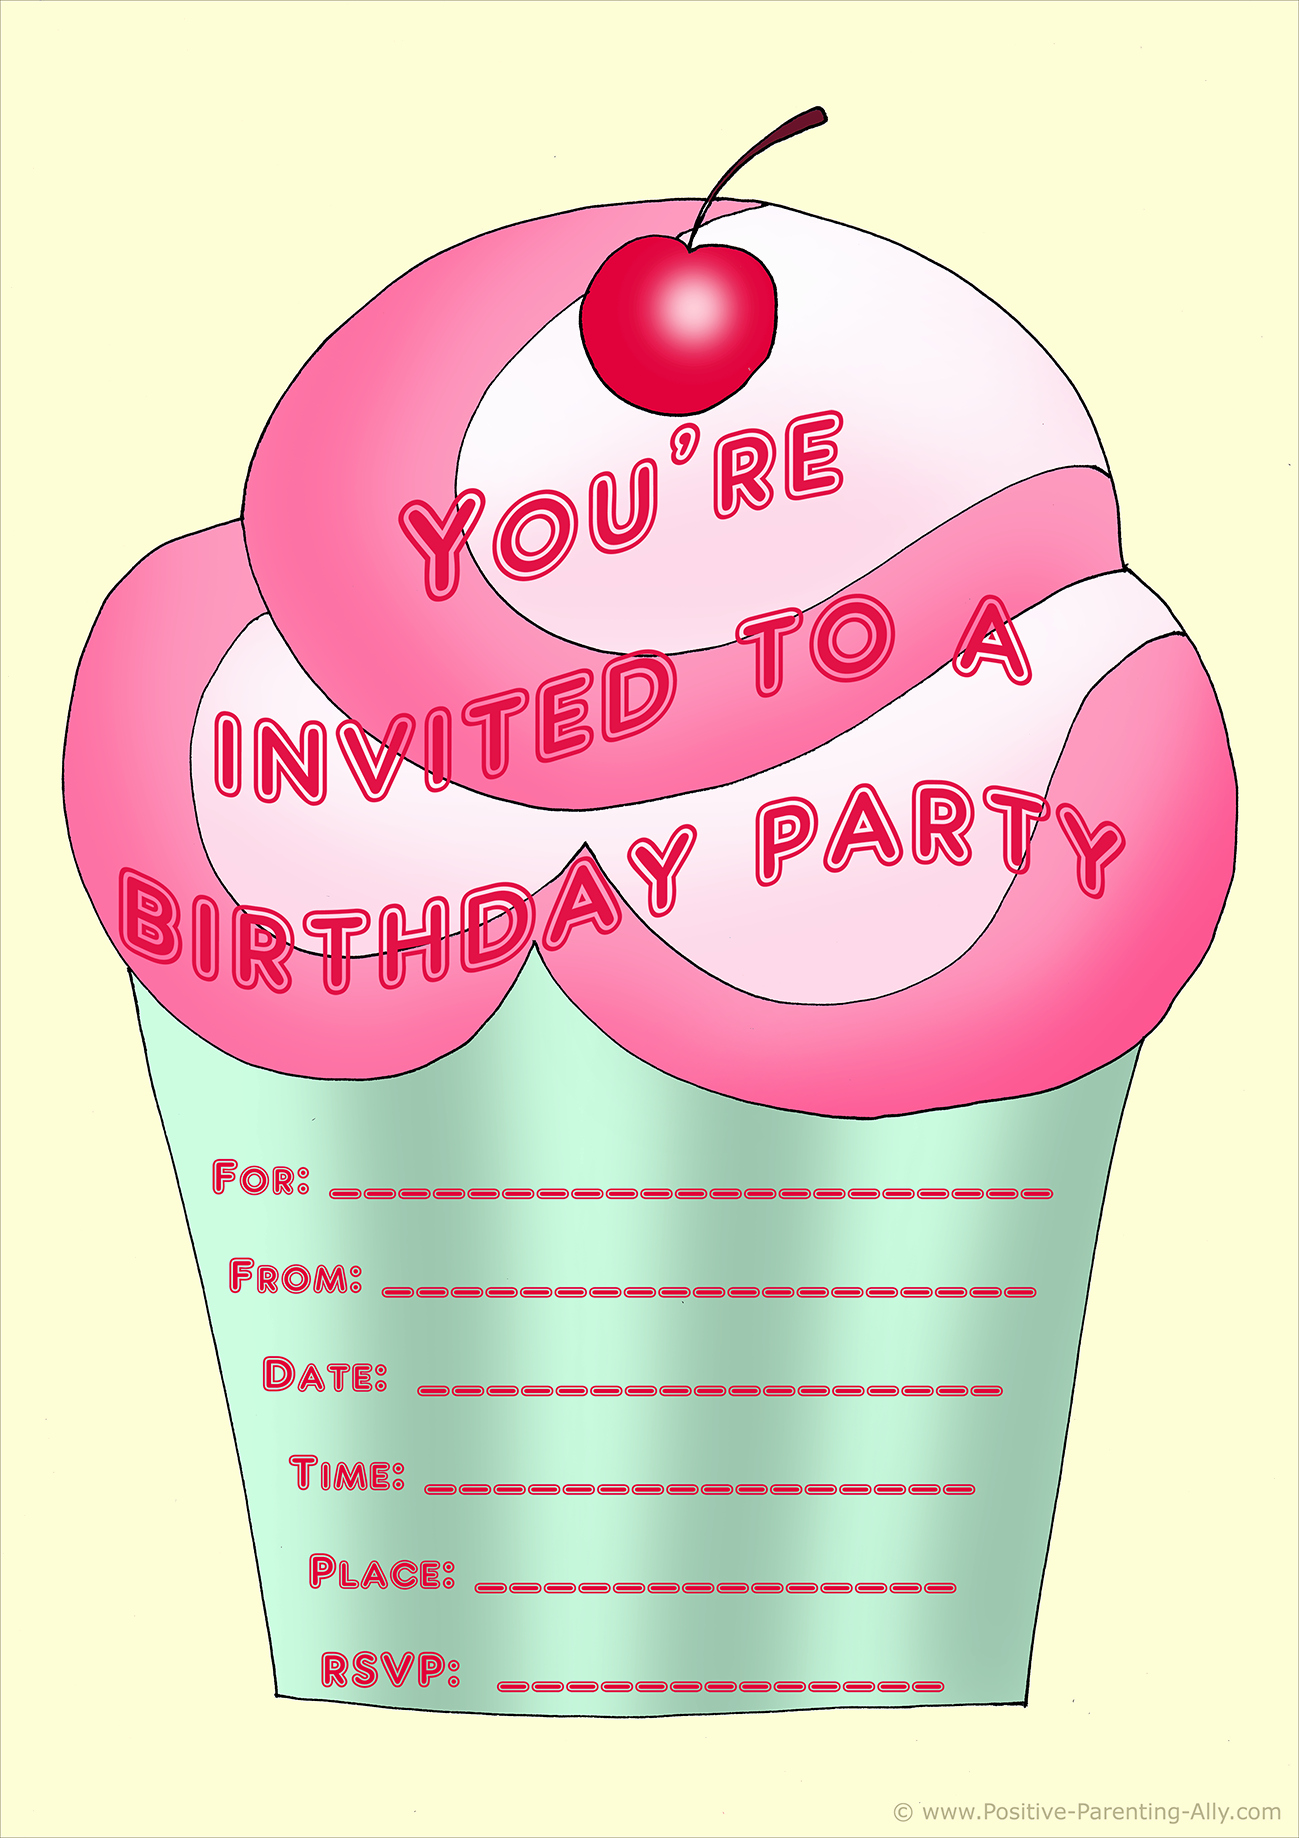 Printable Birthday Party Invitations Awesome Free Birthday Party Invites for Kids In High Print Quality